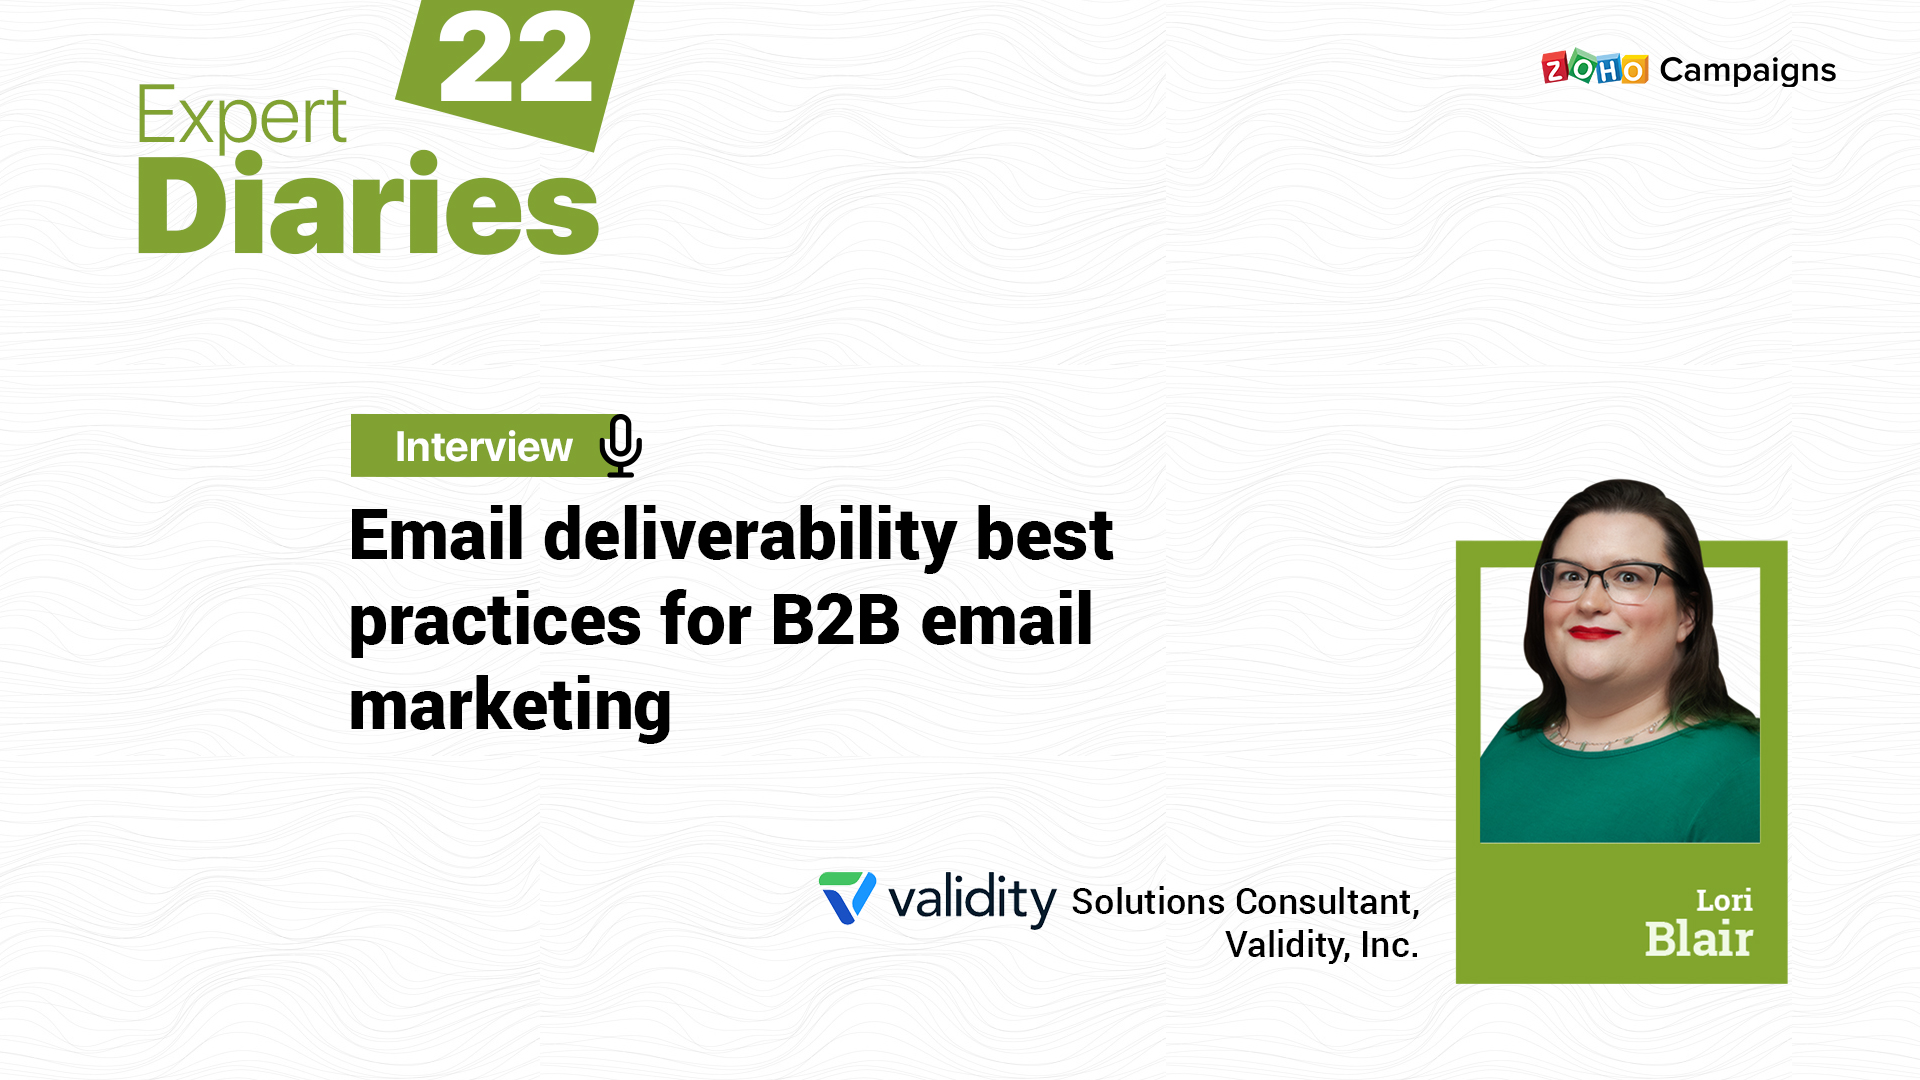 Email deliverability best practices for B2B email marketing